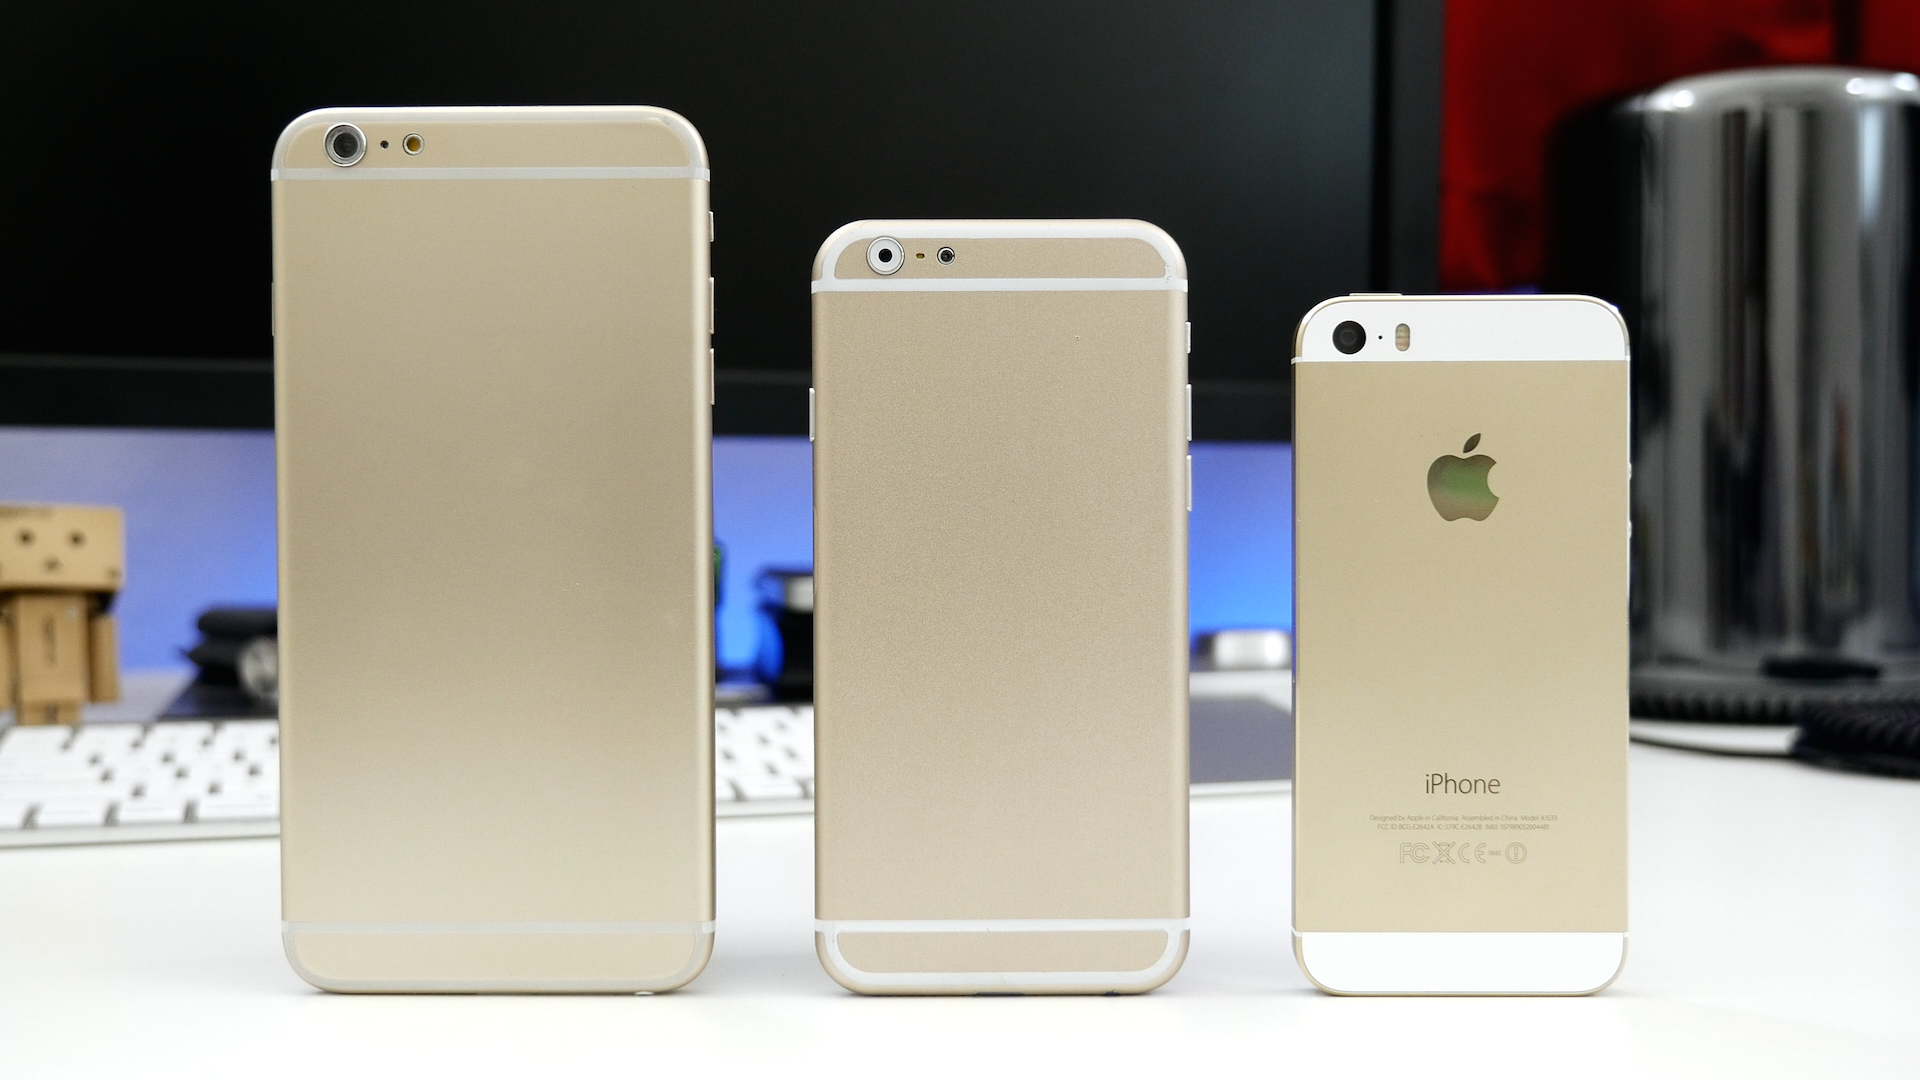 grond intern Zoekmachinemarketing 5.5-Inch iPhone 6 mockup compared to iPhone 5s and other Android phablets  (Video) - 9to5Mac